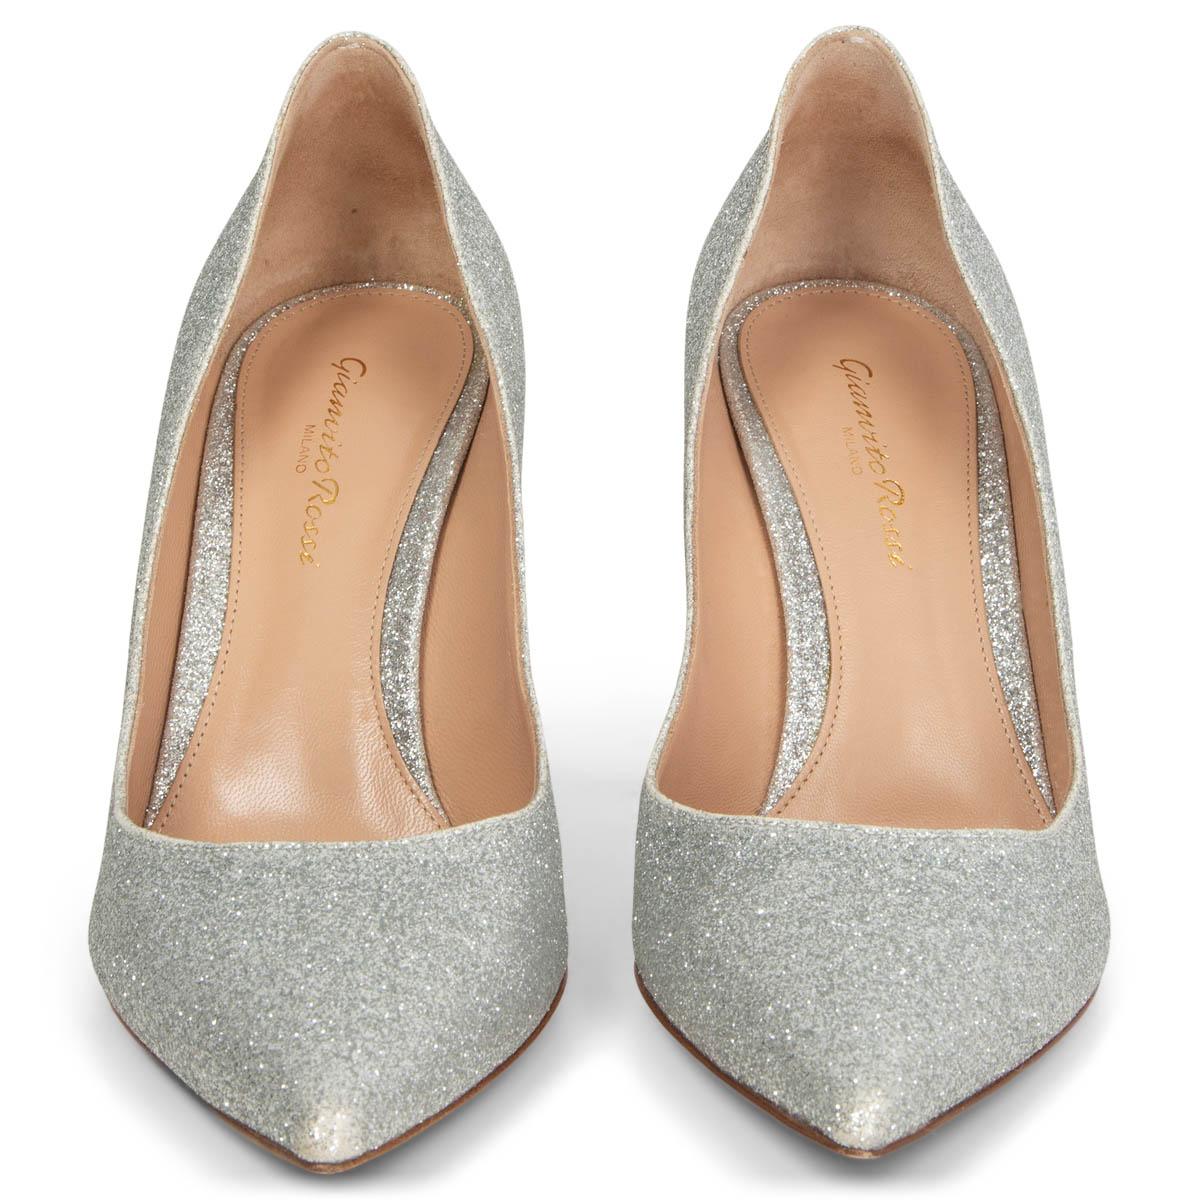 100% authentic Gianvito Rossi classic pointed-toe pumps in silver glitter embellished calfskin. Have been worn once and lost some glitter at the tip. Overall in excellent condition. Come with dust bag. 

Measurements
Imprinted Size	38.5
Shoe